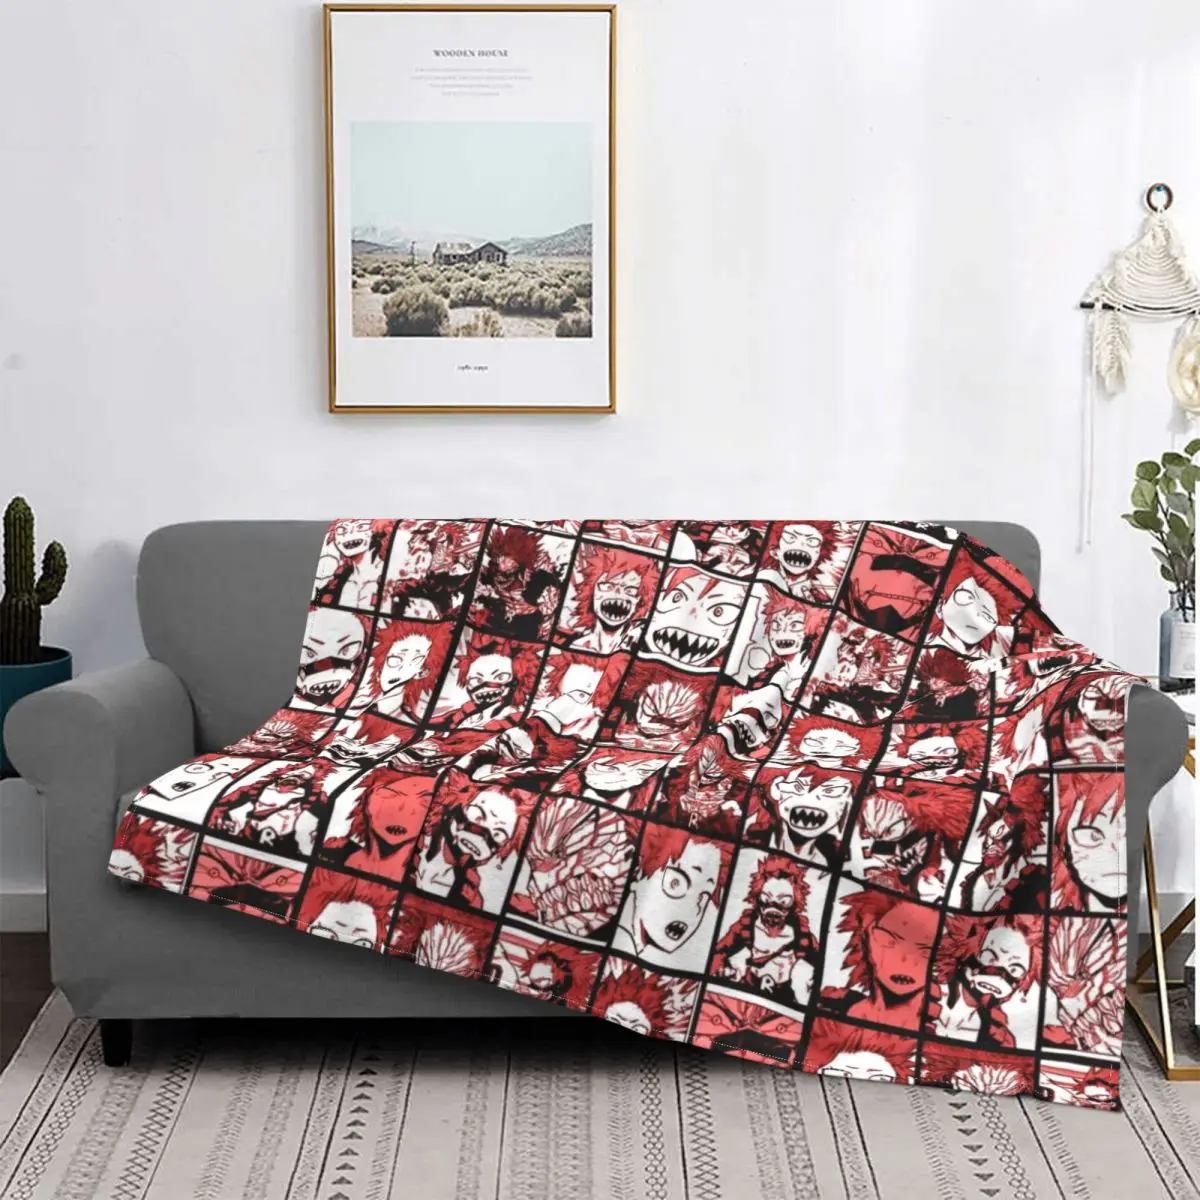 

My Hero Academia BNHA Kirishima Collage Blanket Flannel Spring/Autumn Portable Super Soft Throw Blanket for Bed Couch Quilt